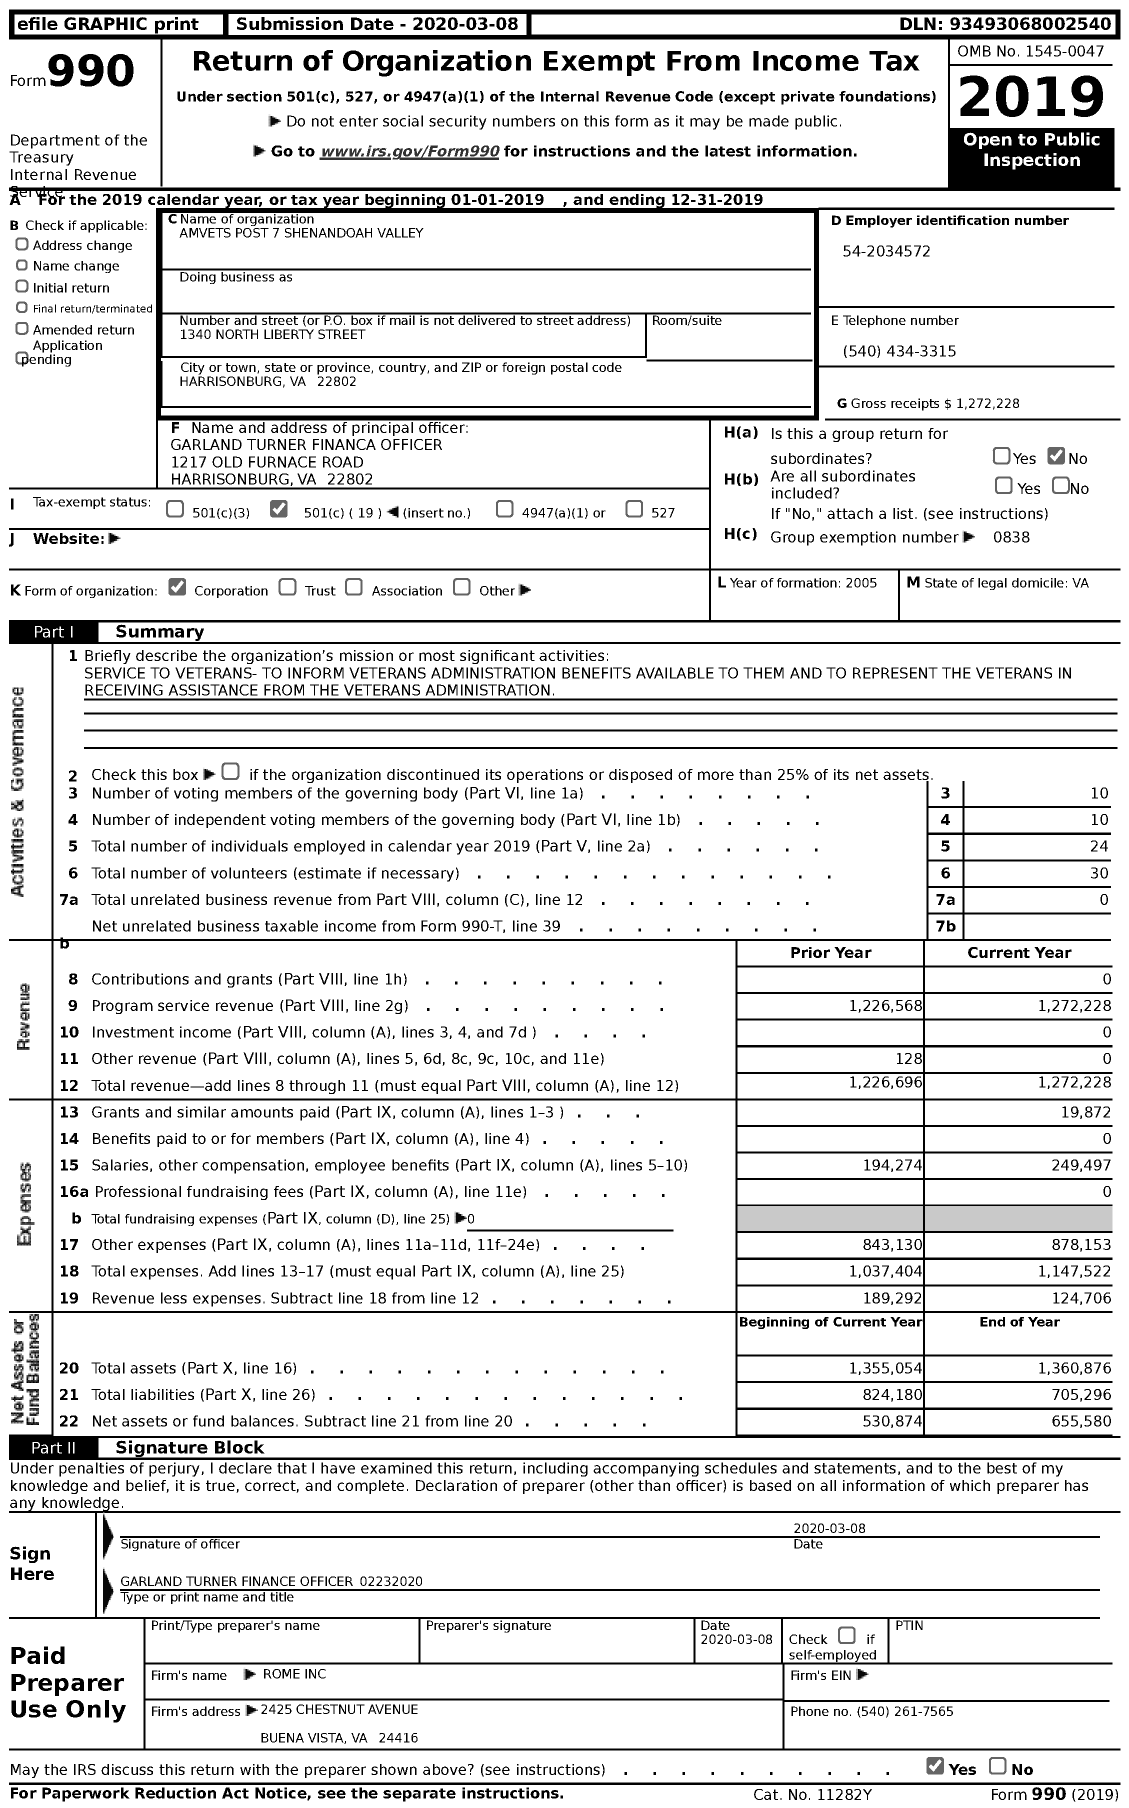 Image of first page of 2019 Form 990 for Amvets Post 7 Shenandoah Valley